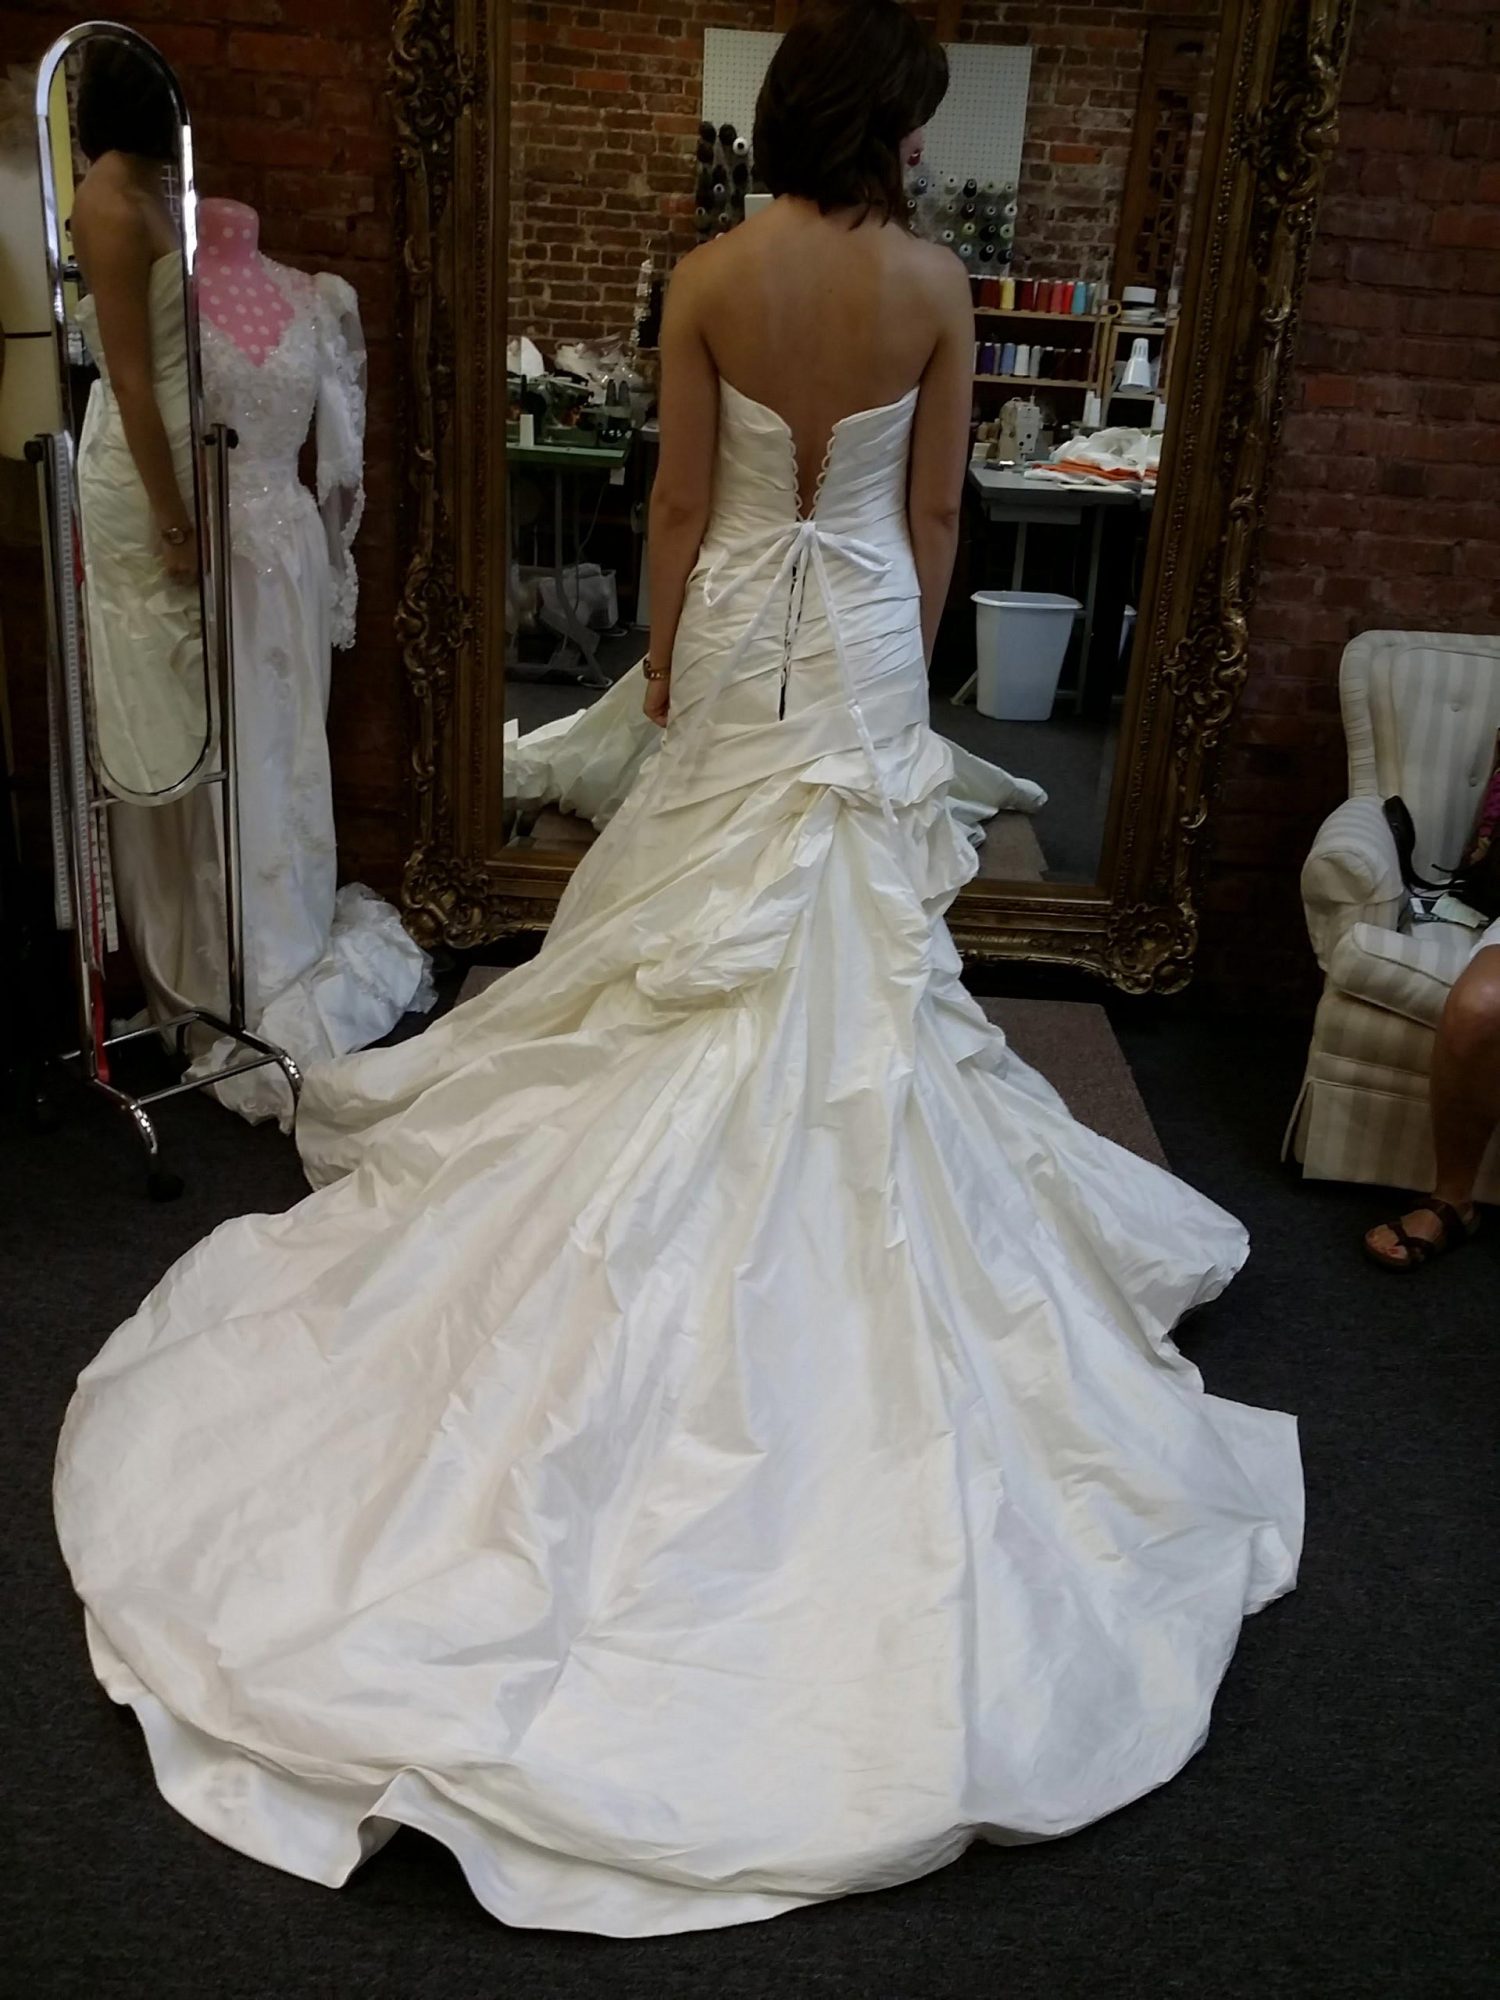 Buy Your Dress Under Budget To Make Room For Alterations Tri Cities Premier Bride